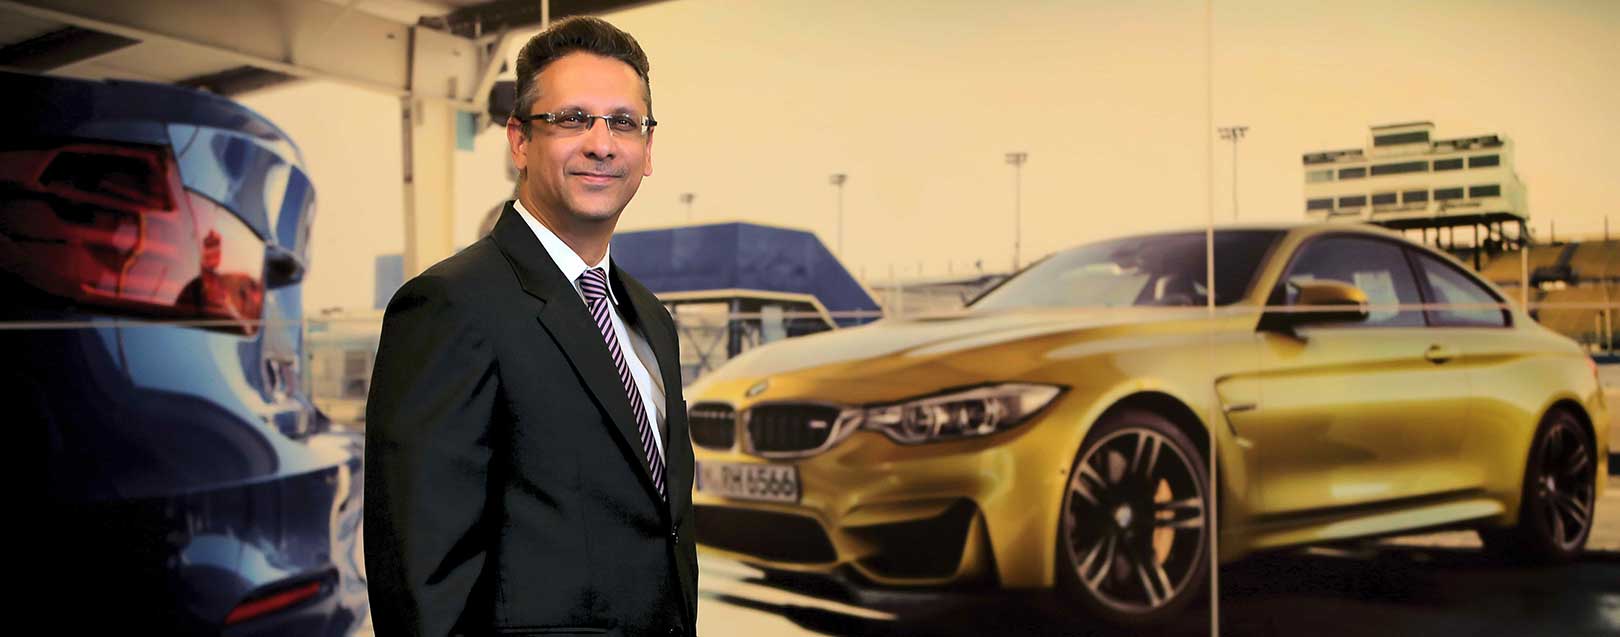 100 years for BMW Group means 100 years of forward thinking, Vikram Pahwa